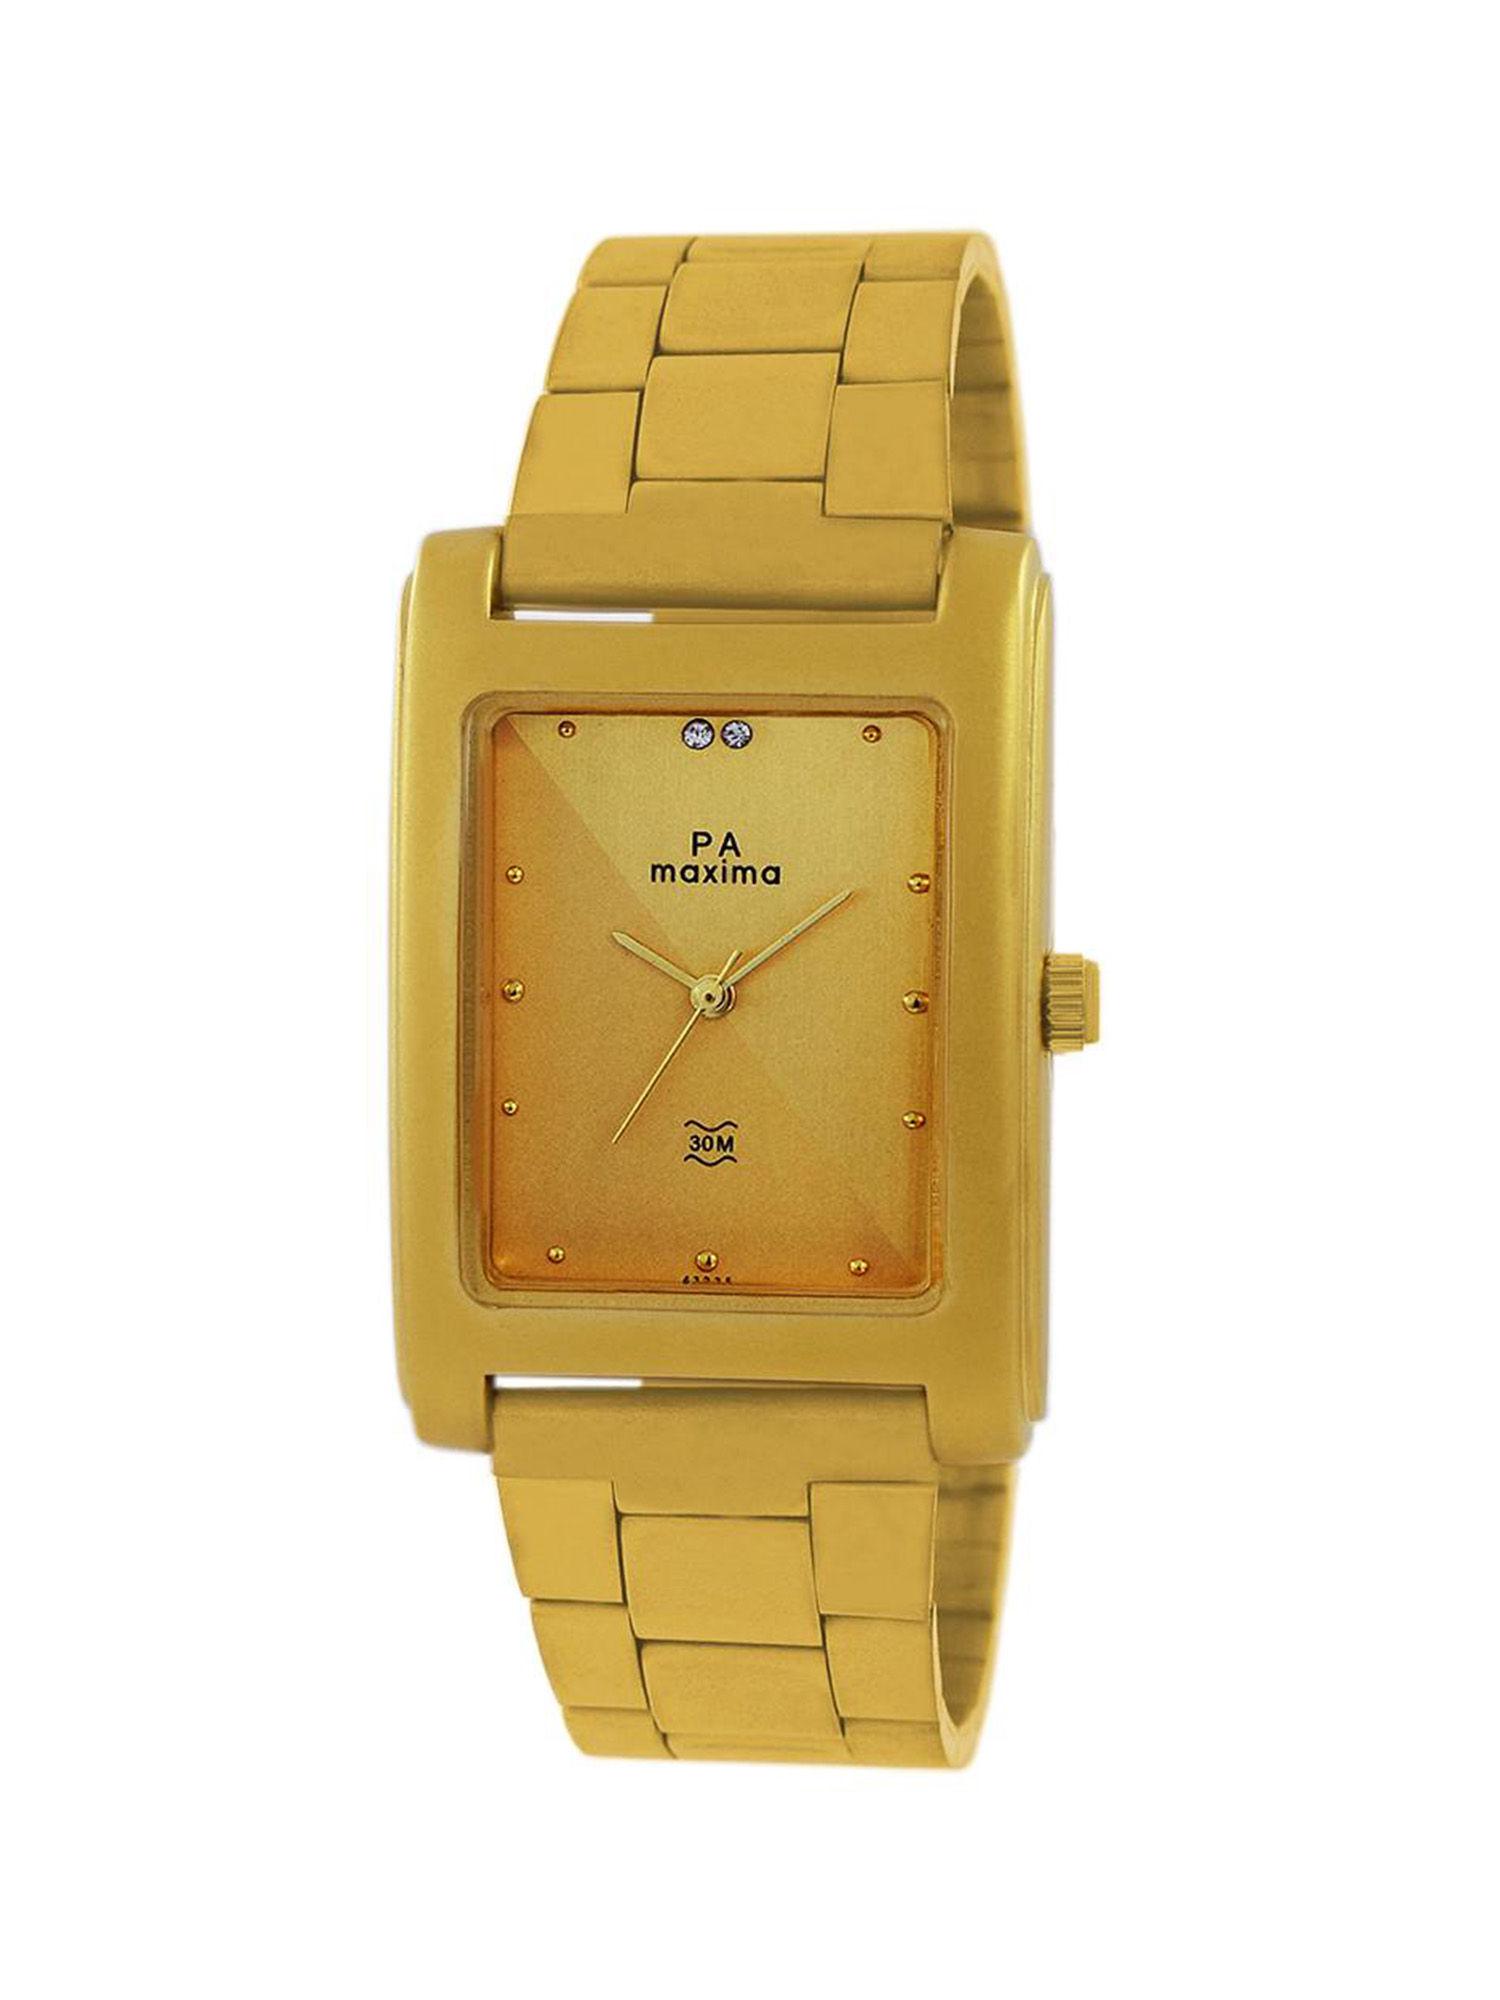 attivo analog watch for men in gold dial color